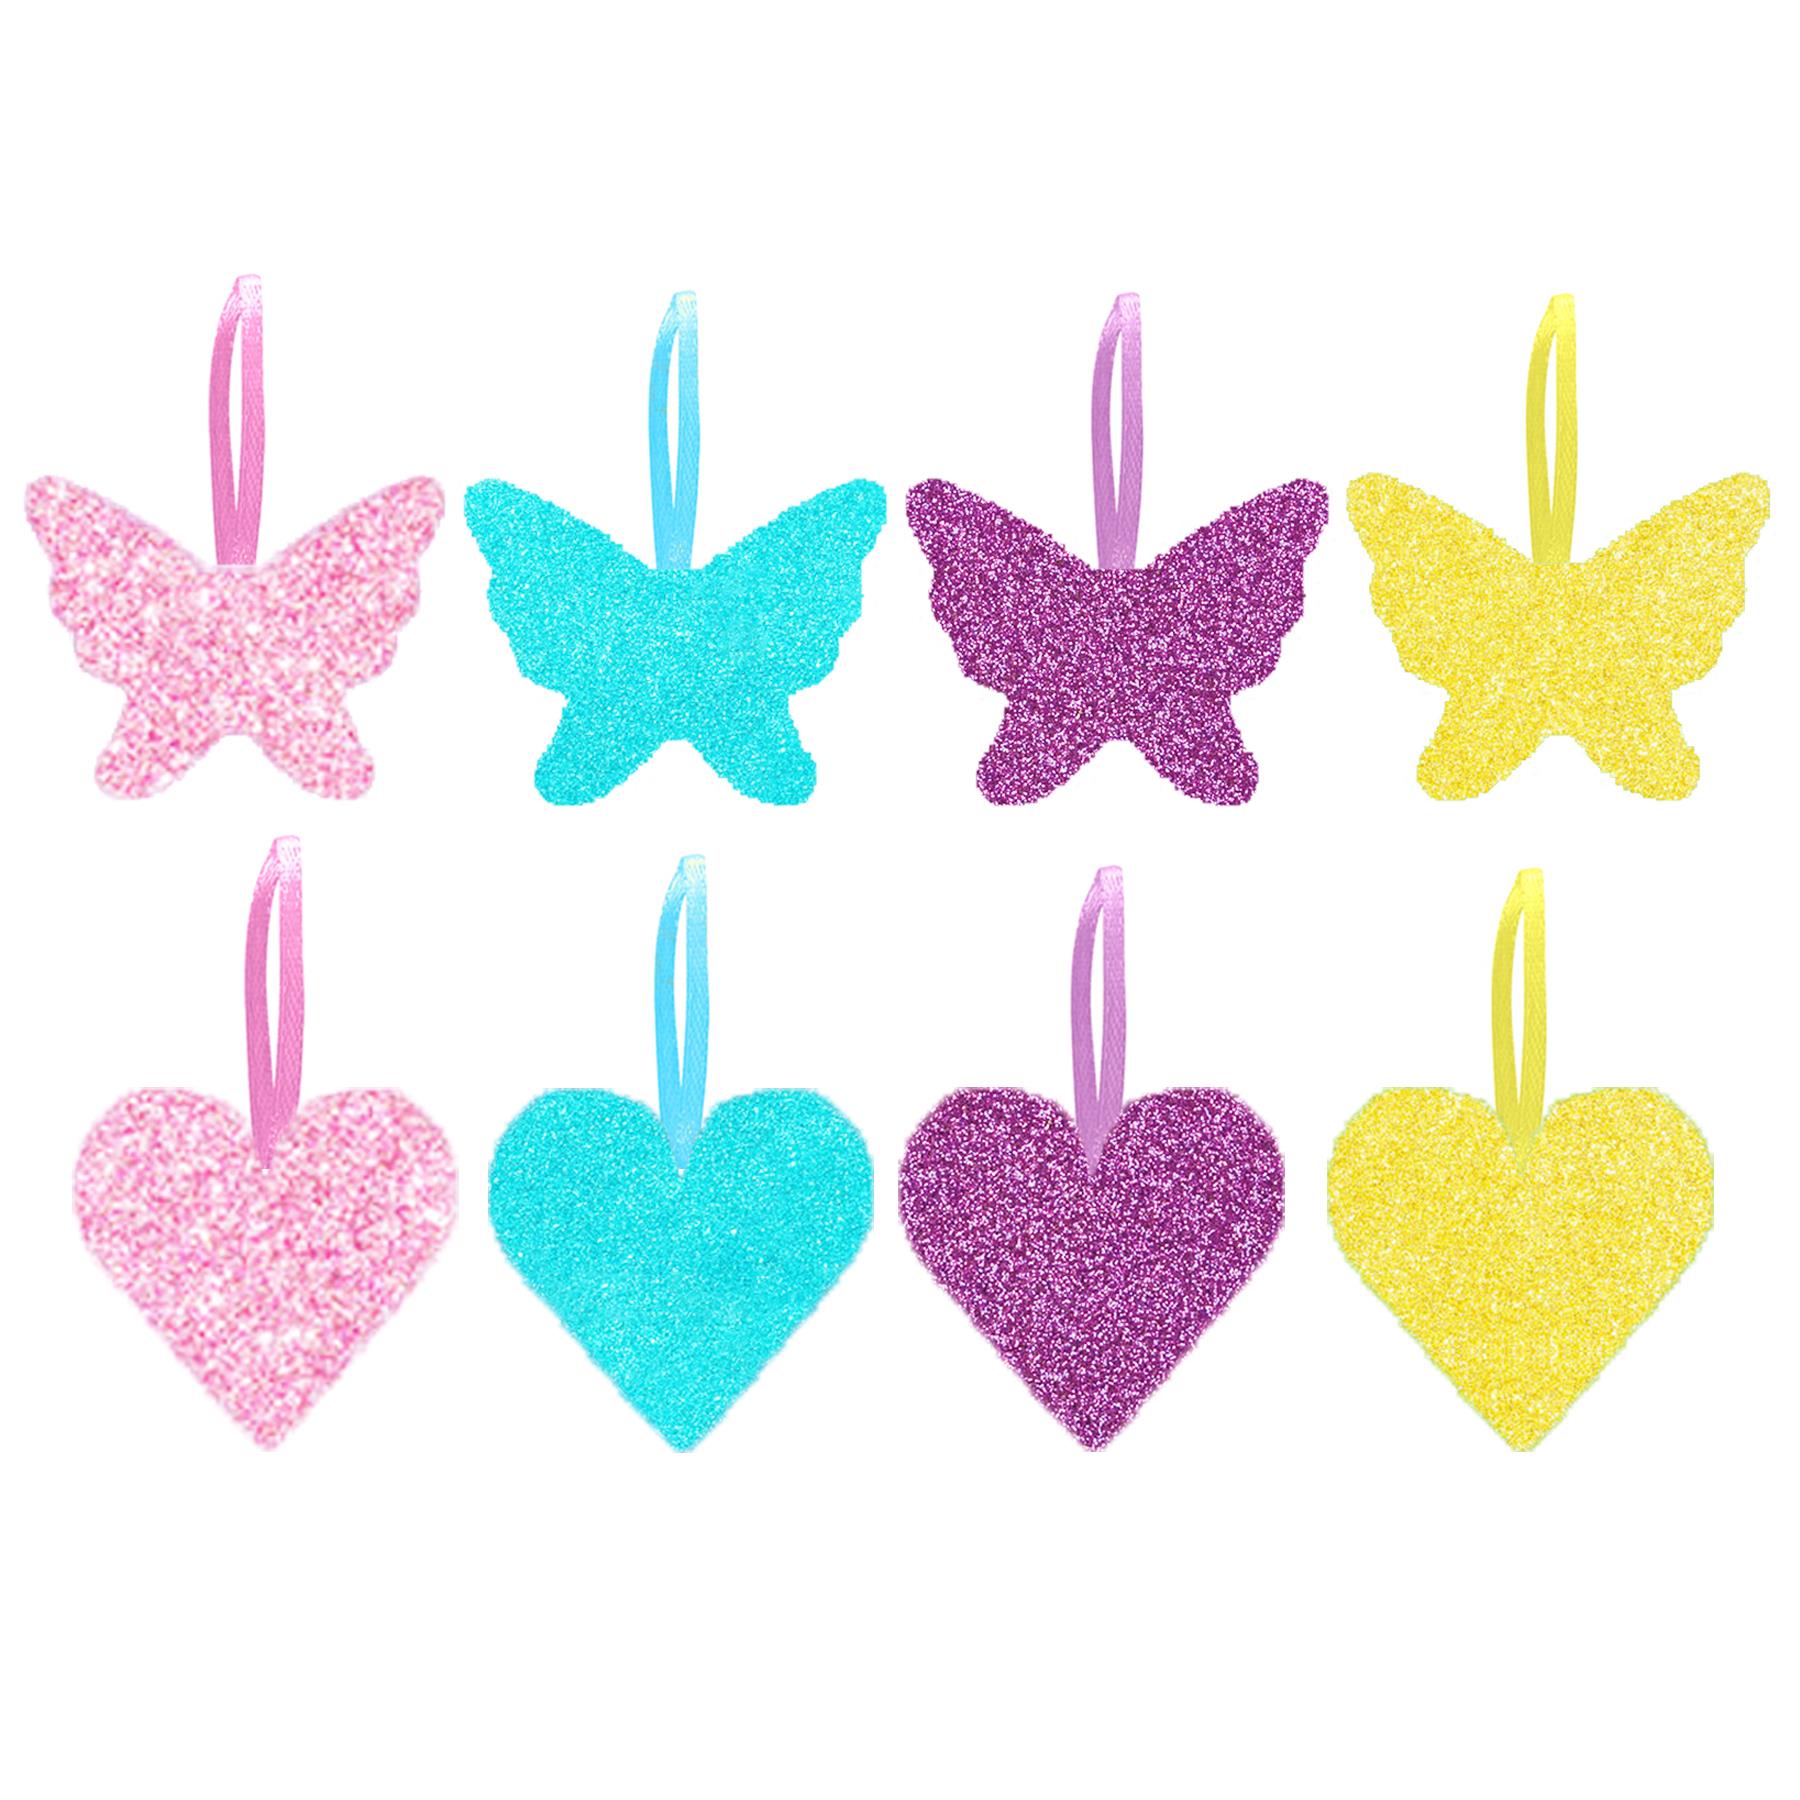 Easter Decorations, Bonnet Making, Arts and Crafts - Glitter Butterfly / Heart Pack of 8